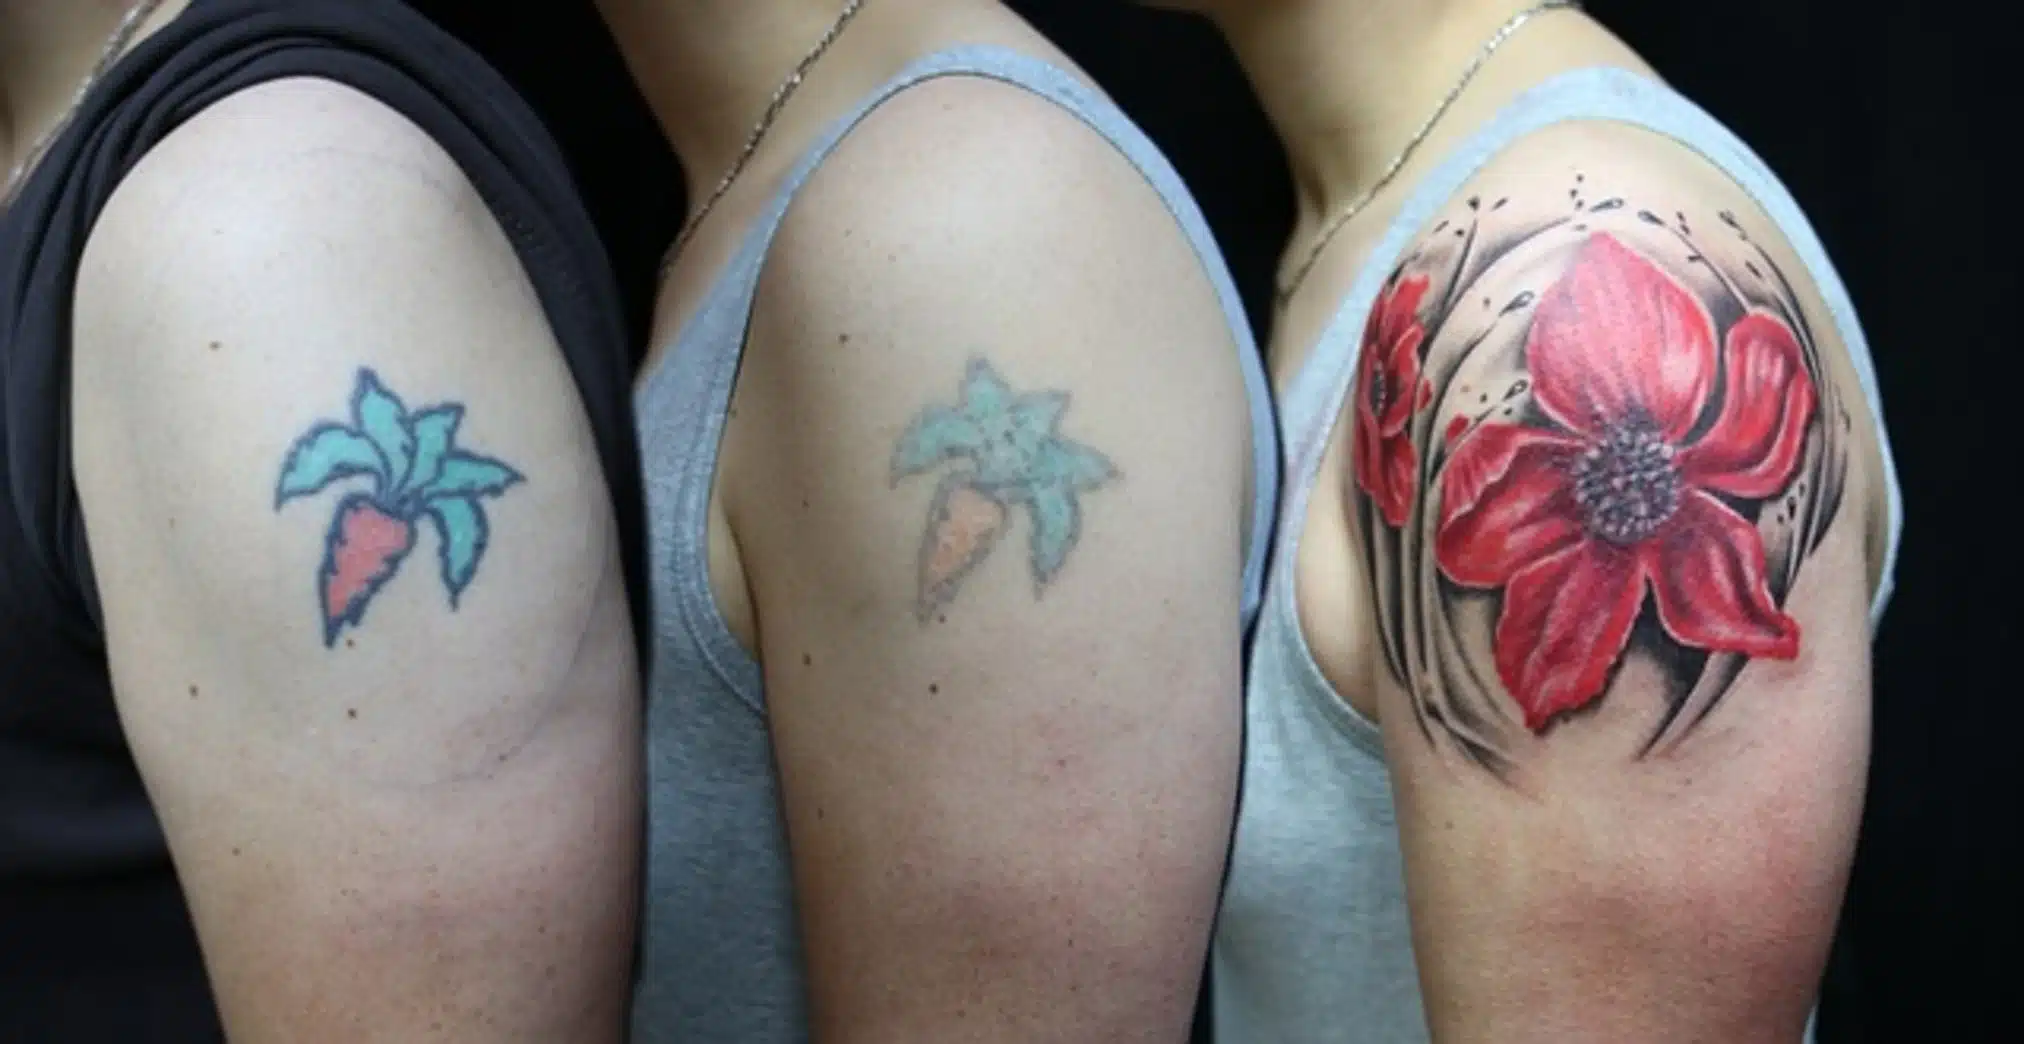 How to Safely Remove Your Tattoo